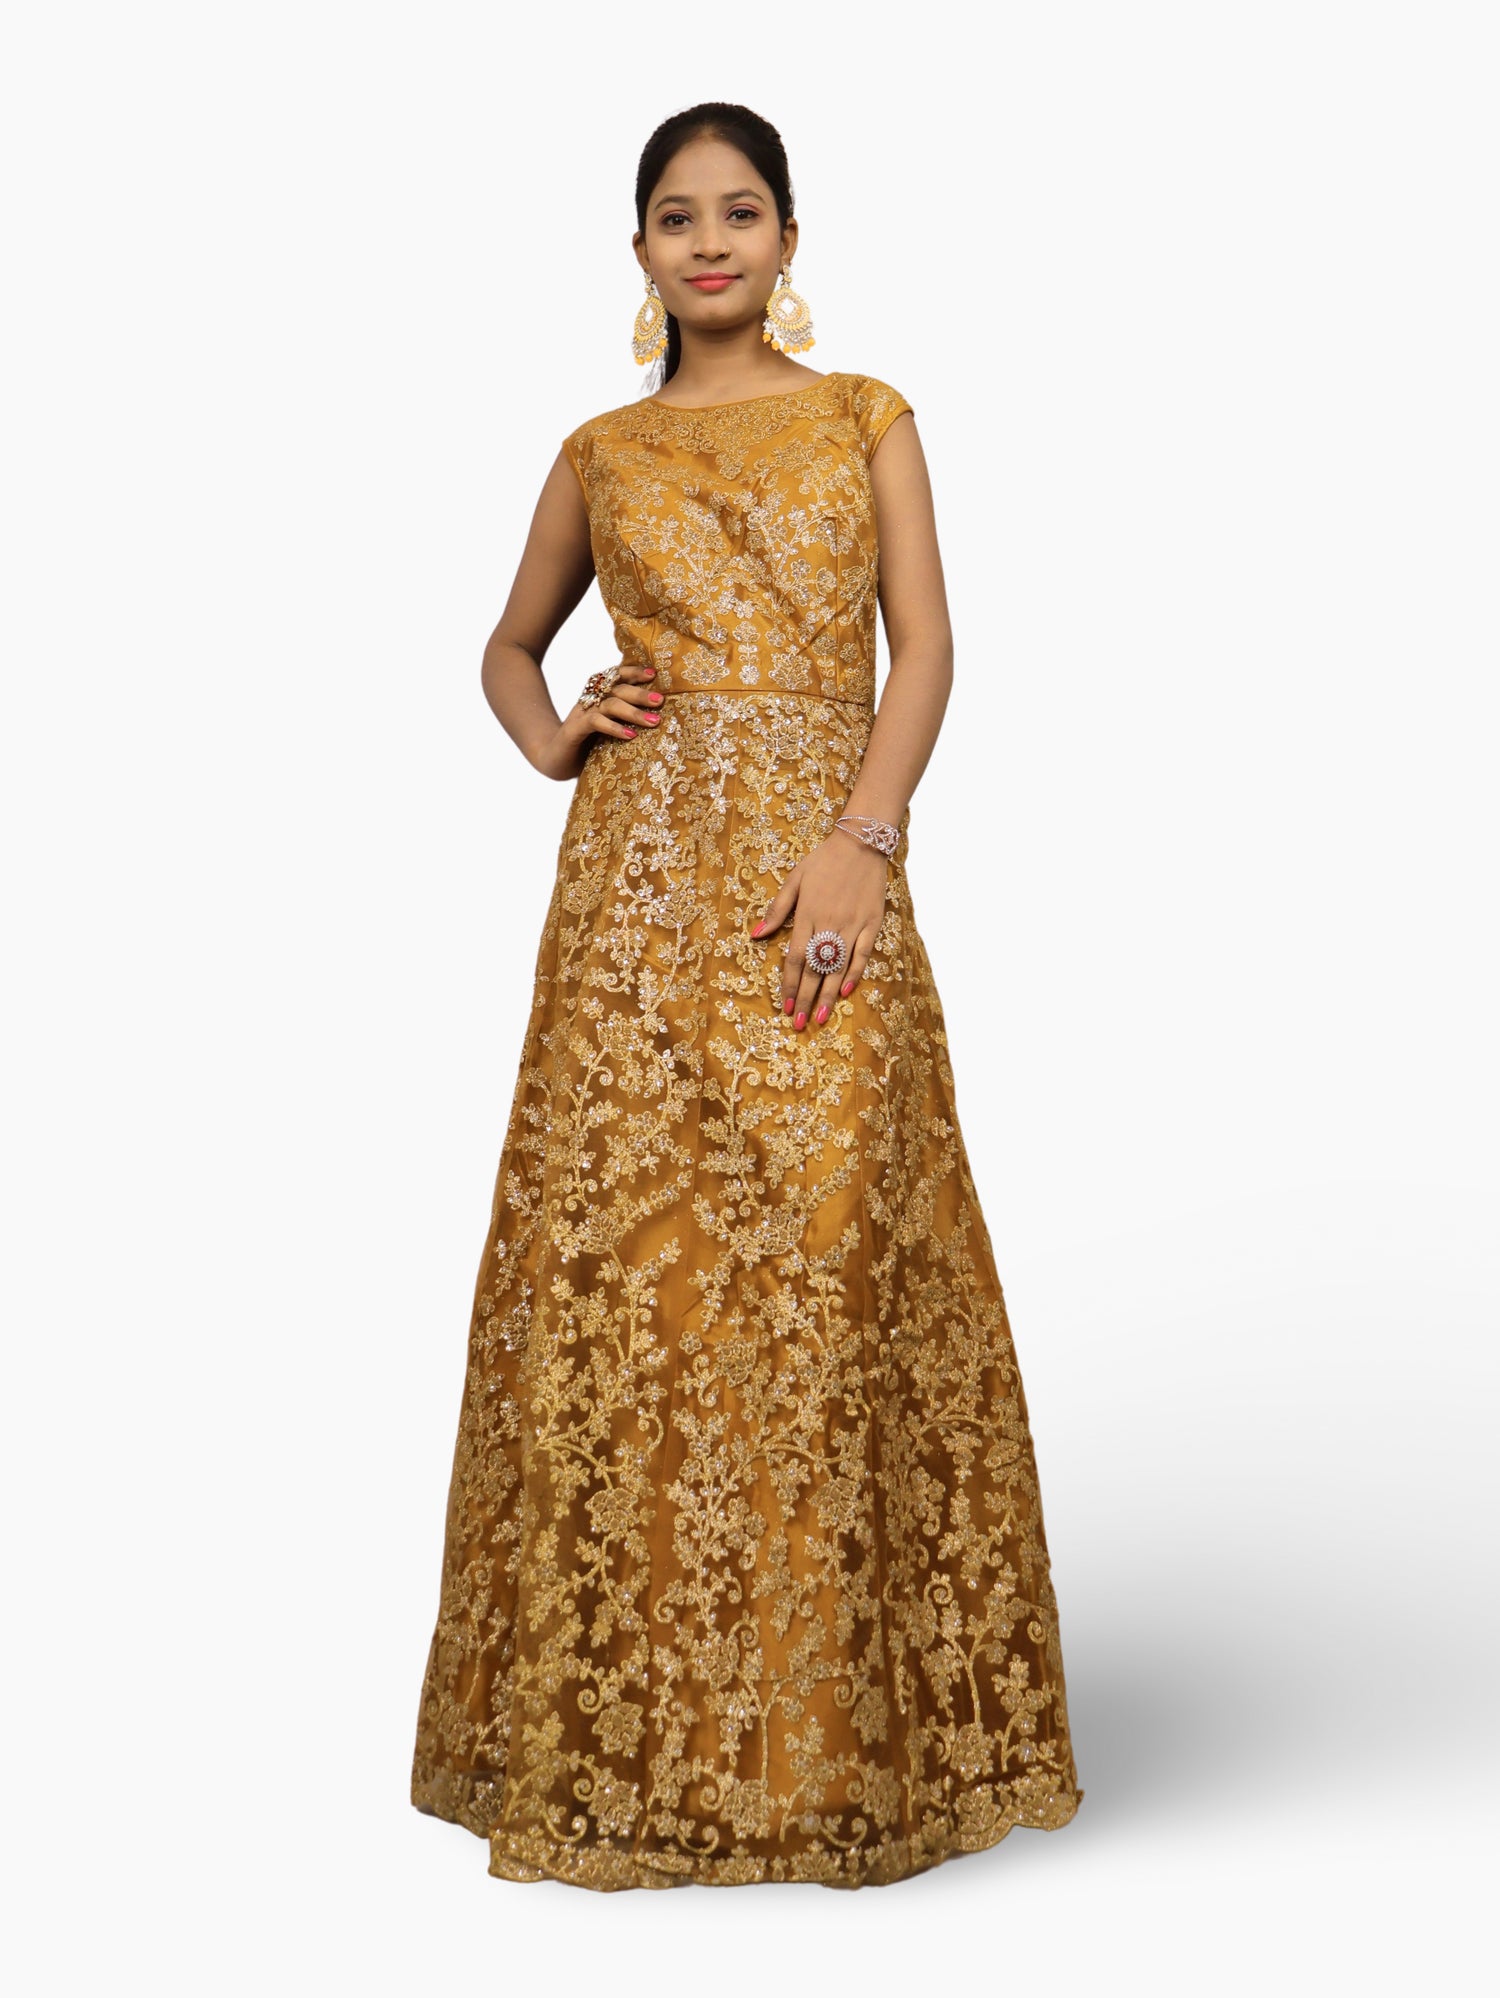 Gown with Shimmery Rubber &amp; Beads Work by Shreekama Mustard Yellow Designer Gowns for Party Festival Wedding Occasion in Noida